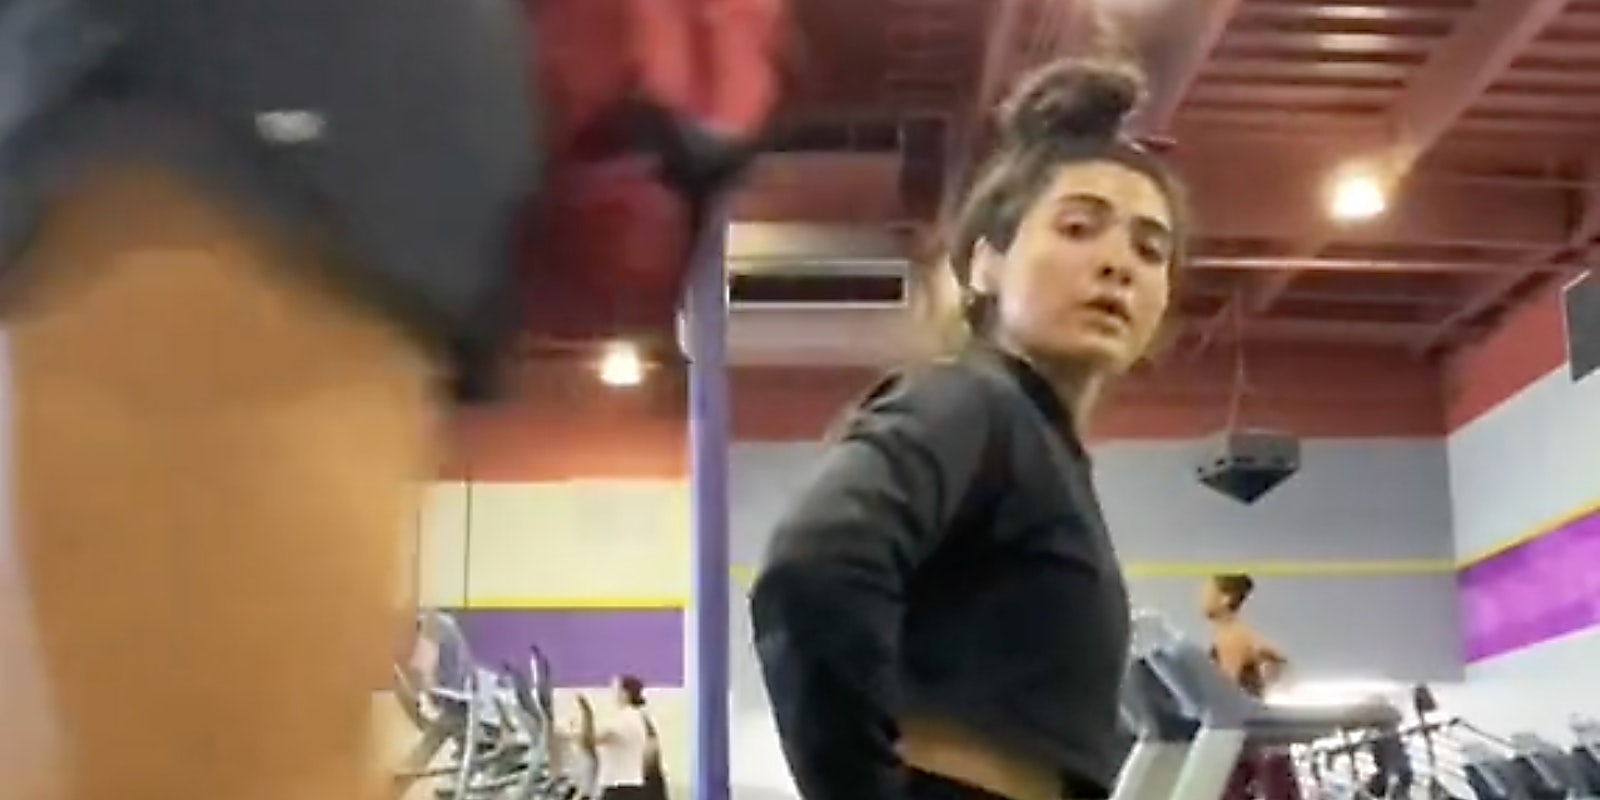 A woman walking past another woman in a gym.